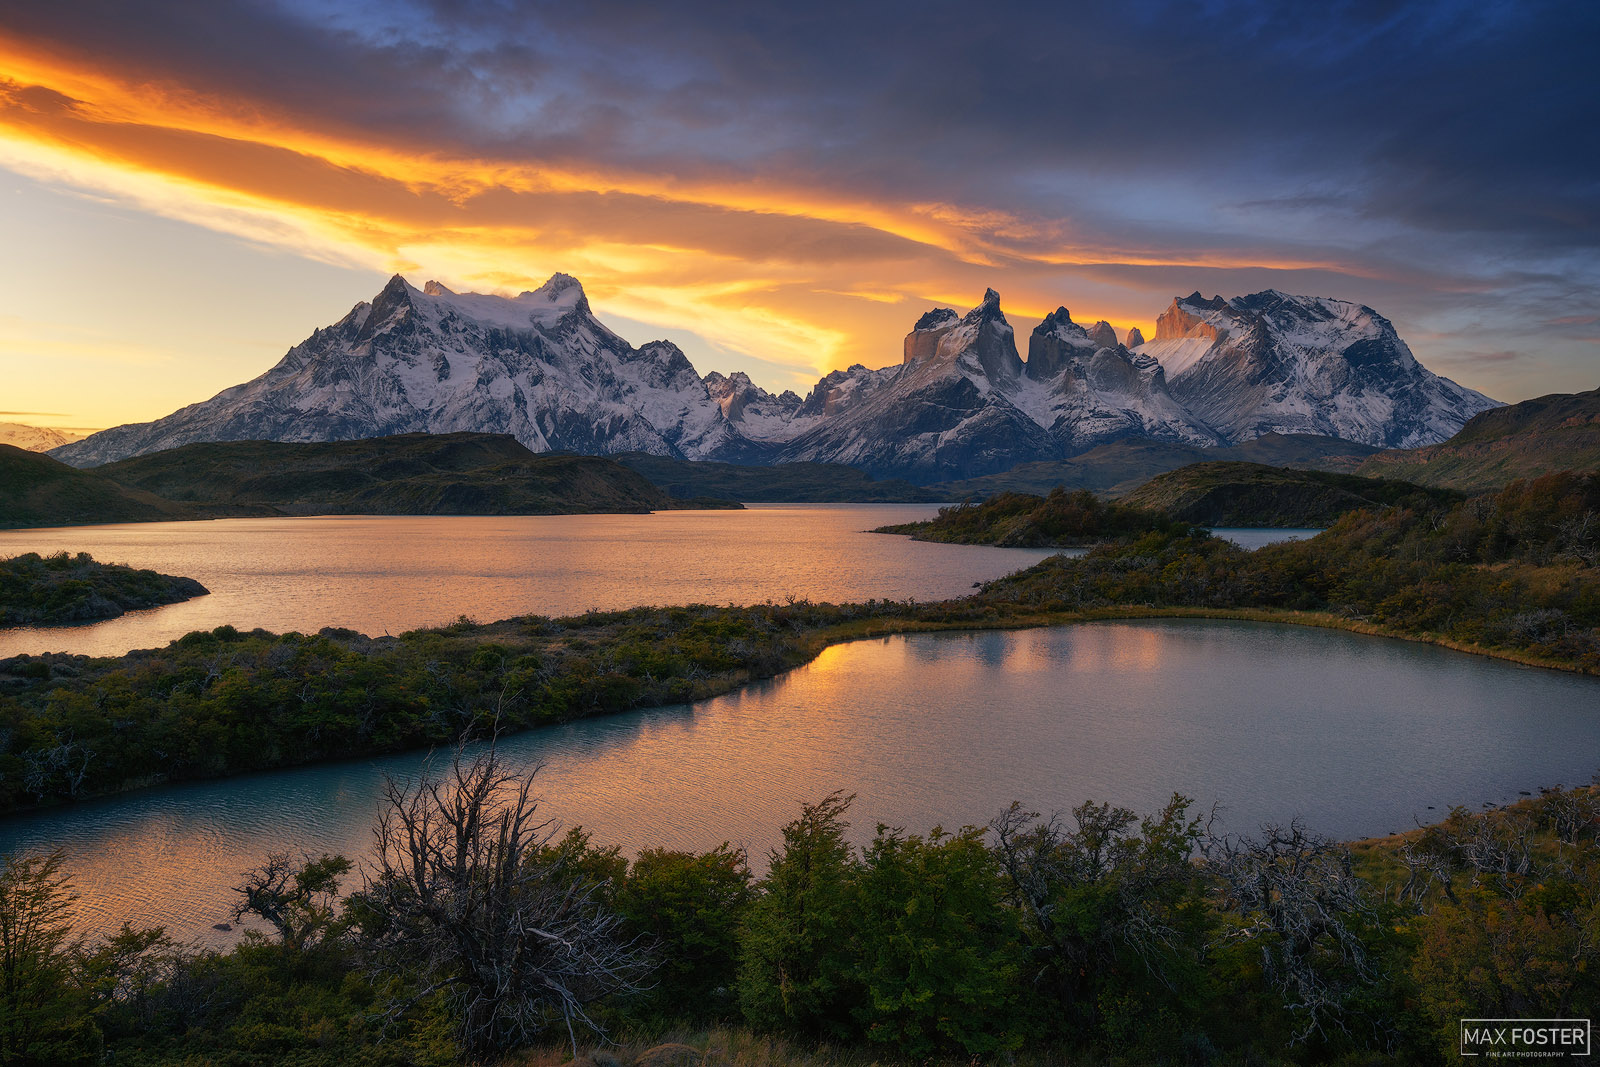 Bring your walls to life with Explora, Max Foster's limited edition photographic print of Torres Del Paine National Park, Chile...